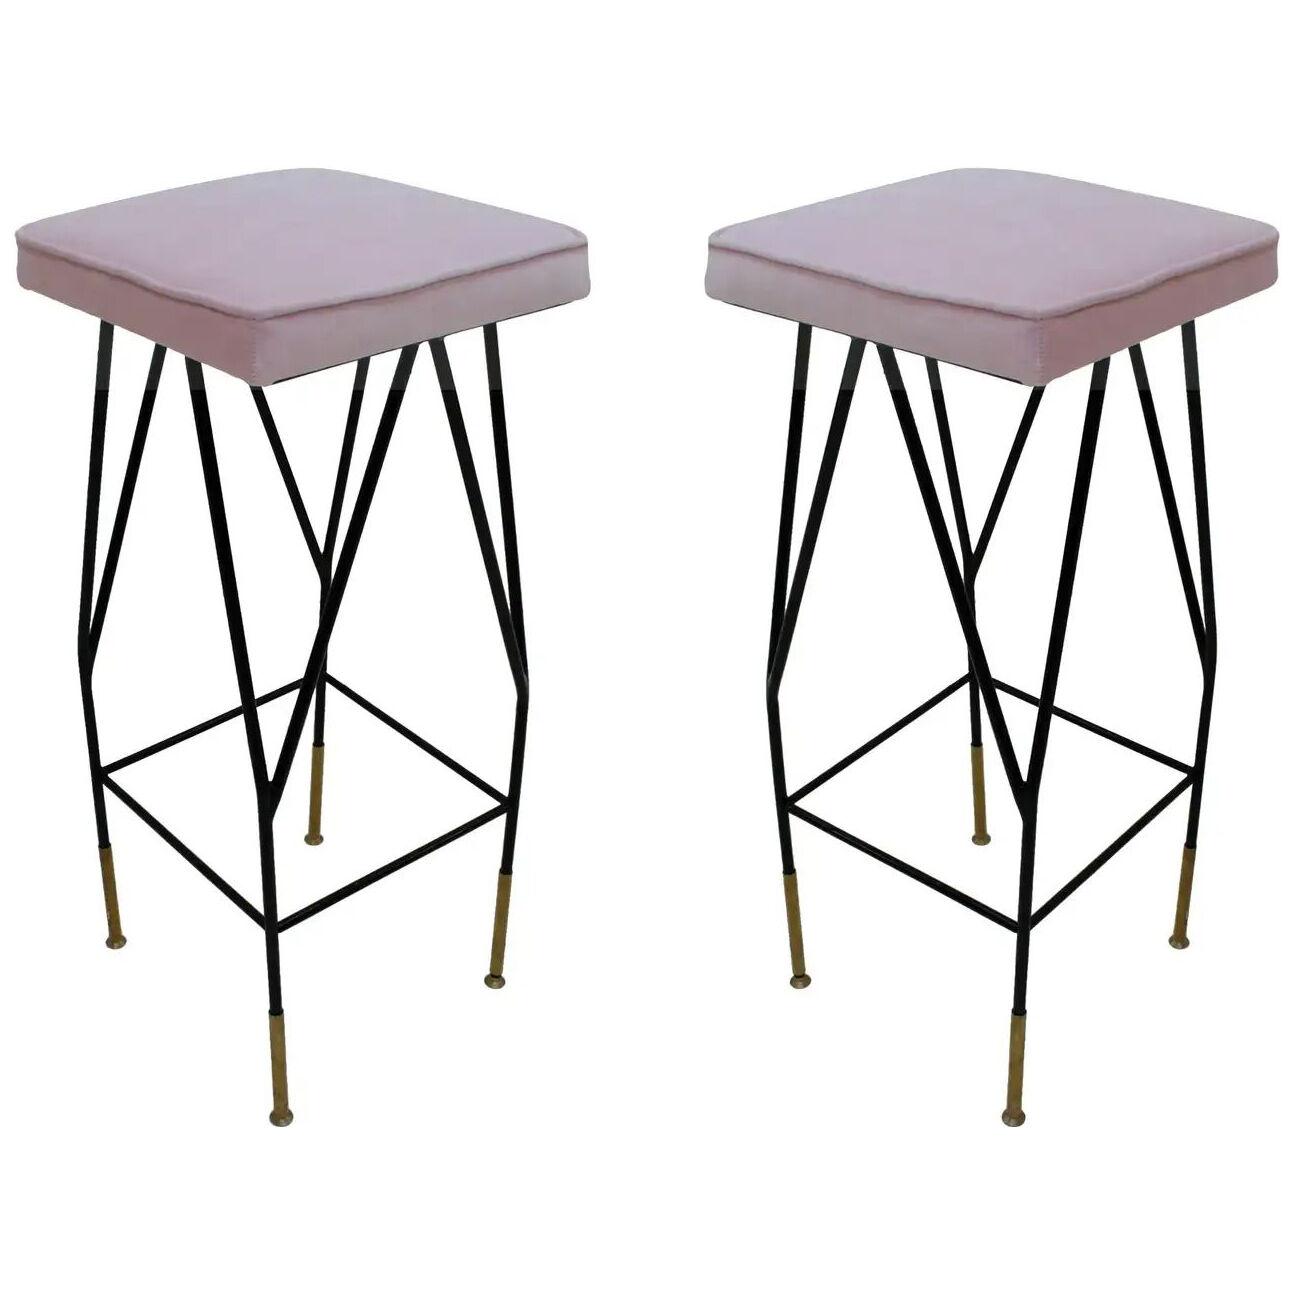 Pink Cotton Velvet and Black Lacquered Metal Italian Stool